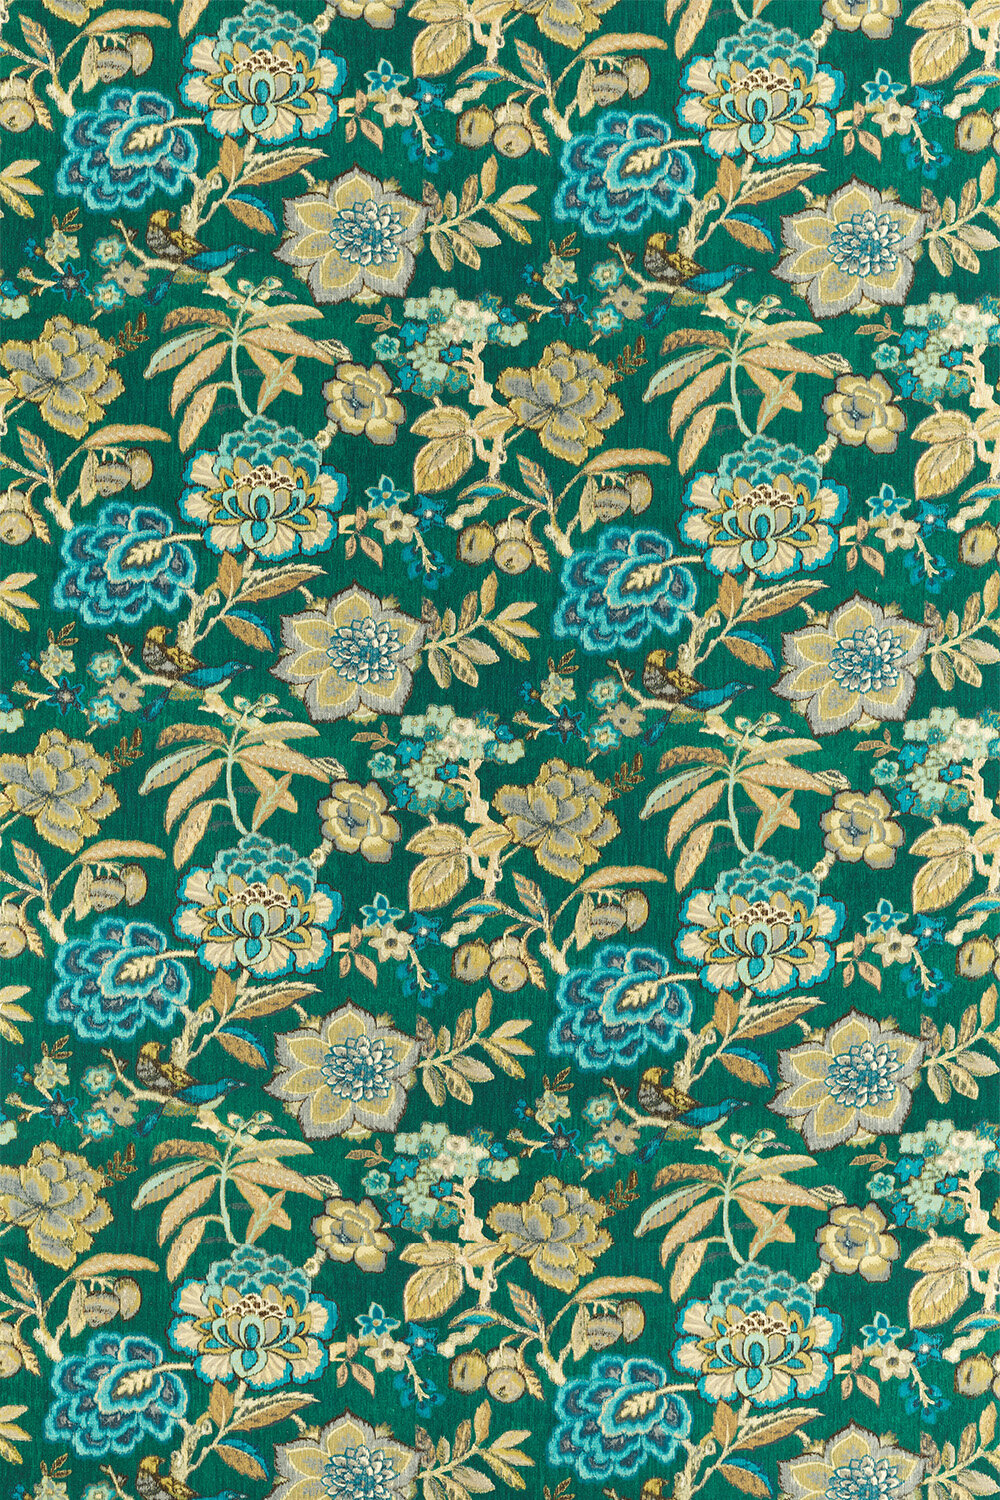 Indra Flower Fabric - Emerald - by Sanderson